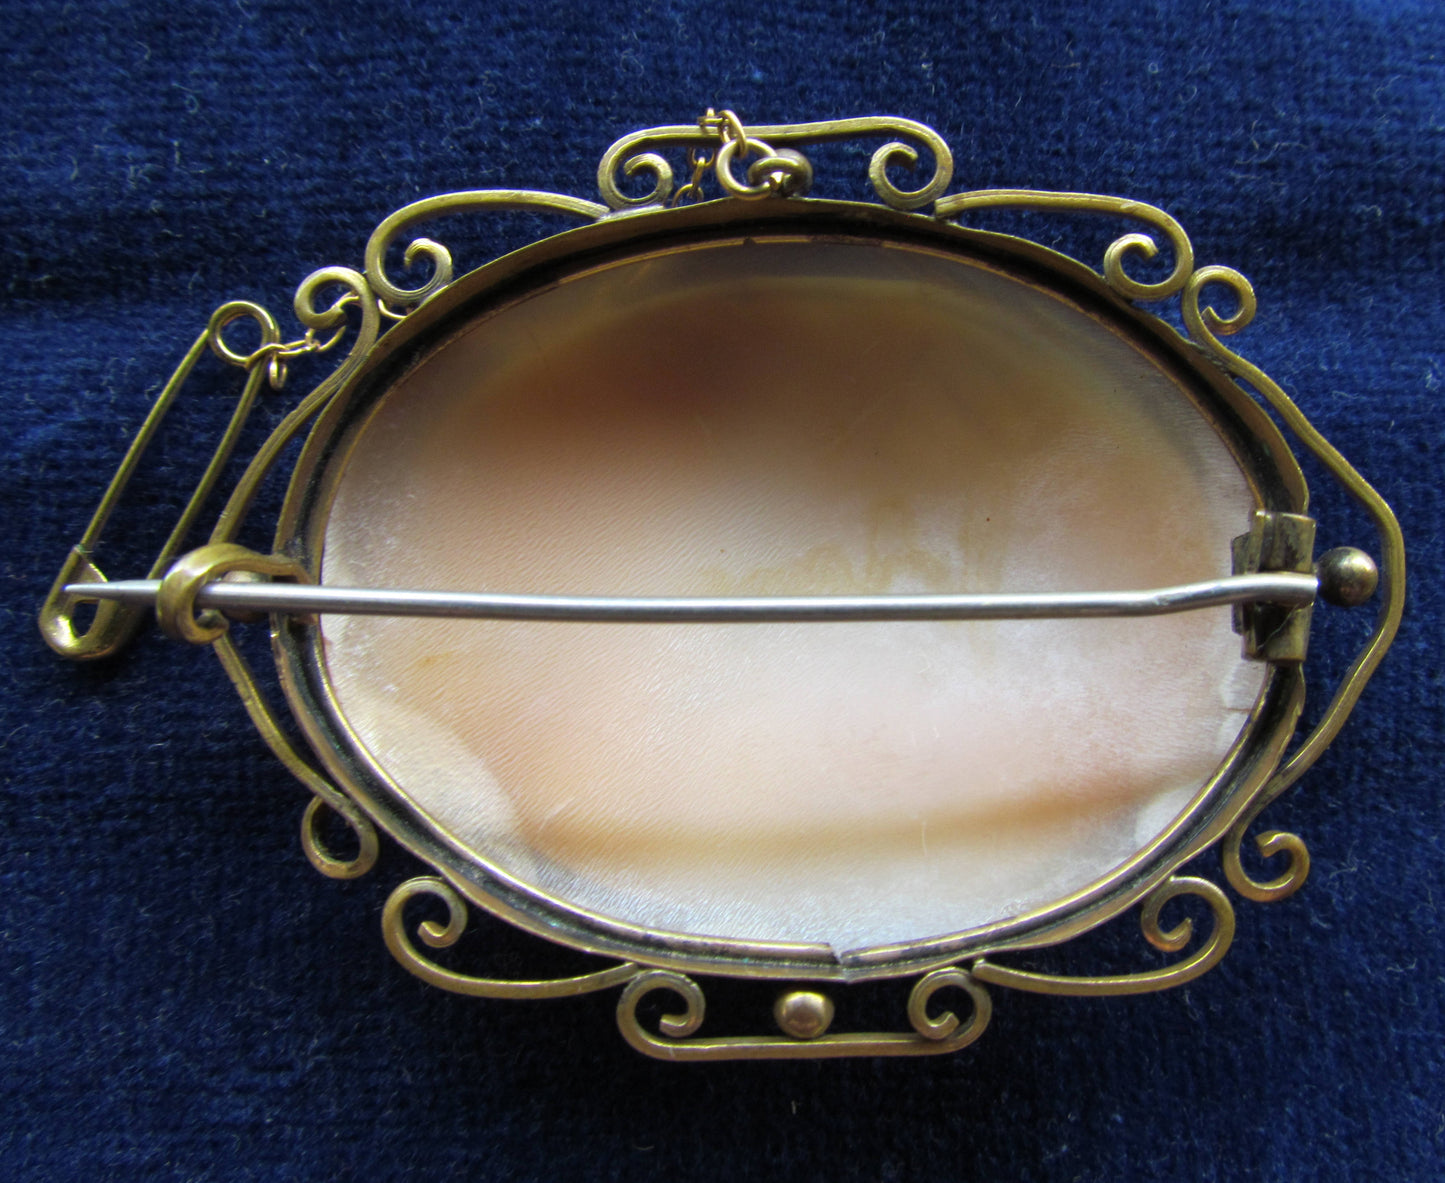 Unmarked Kauri Shell Cameo Brooch With Safety Chain